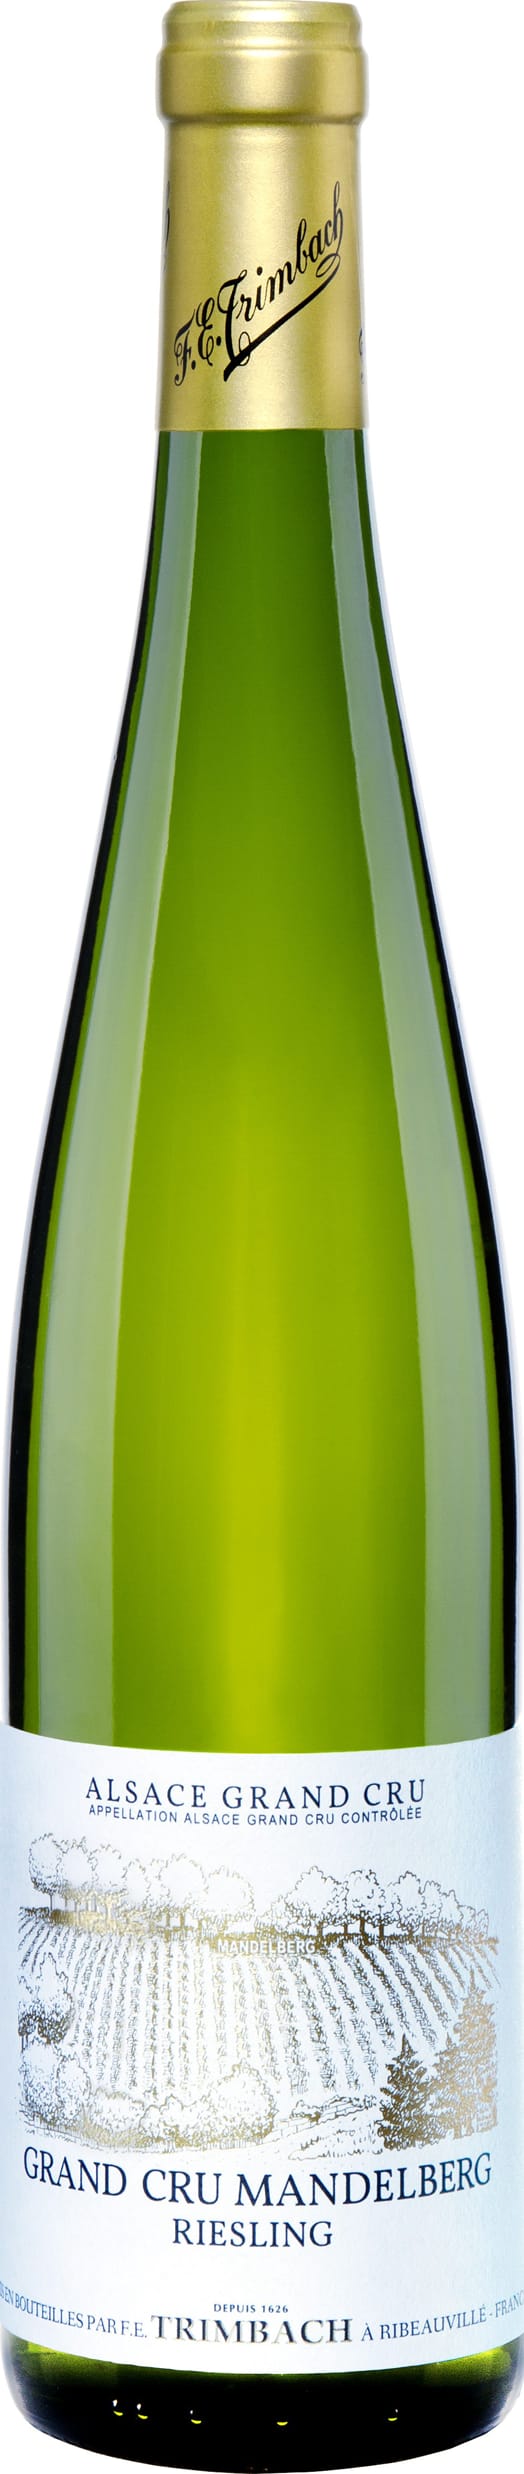 Trimbach Riesling Grand Cru Mandelberg 2019 75cl - Buy Trimbach Wines from GREAT WINES DIRECT wine shop